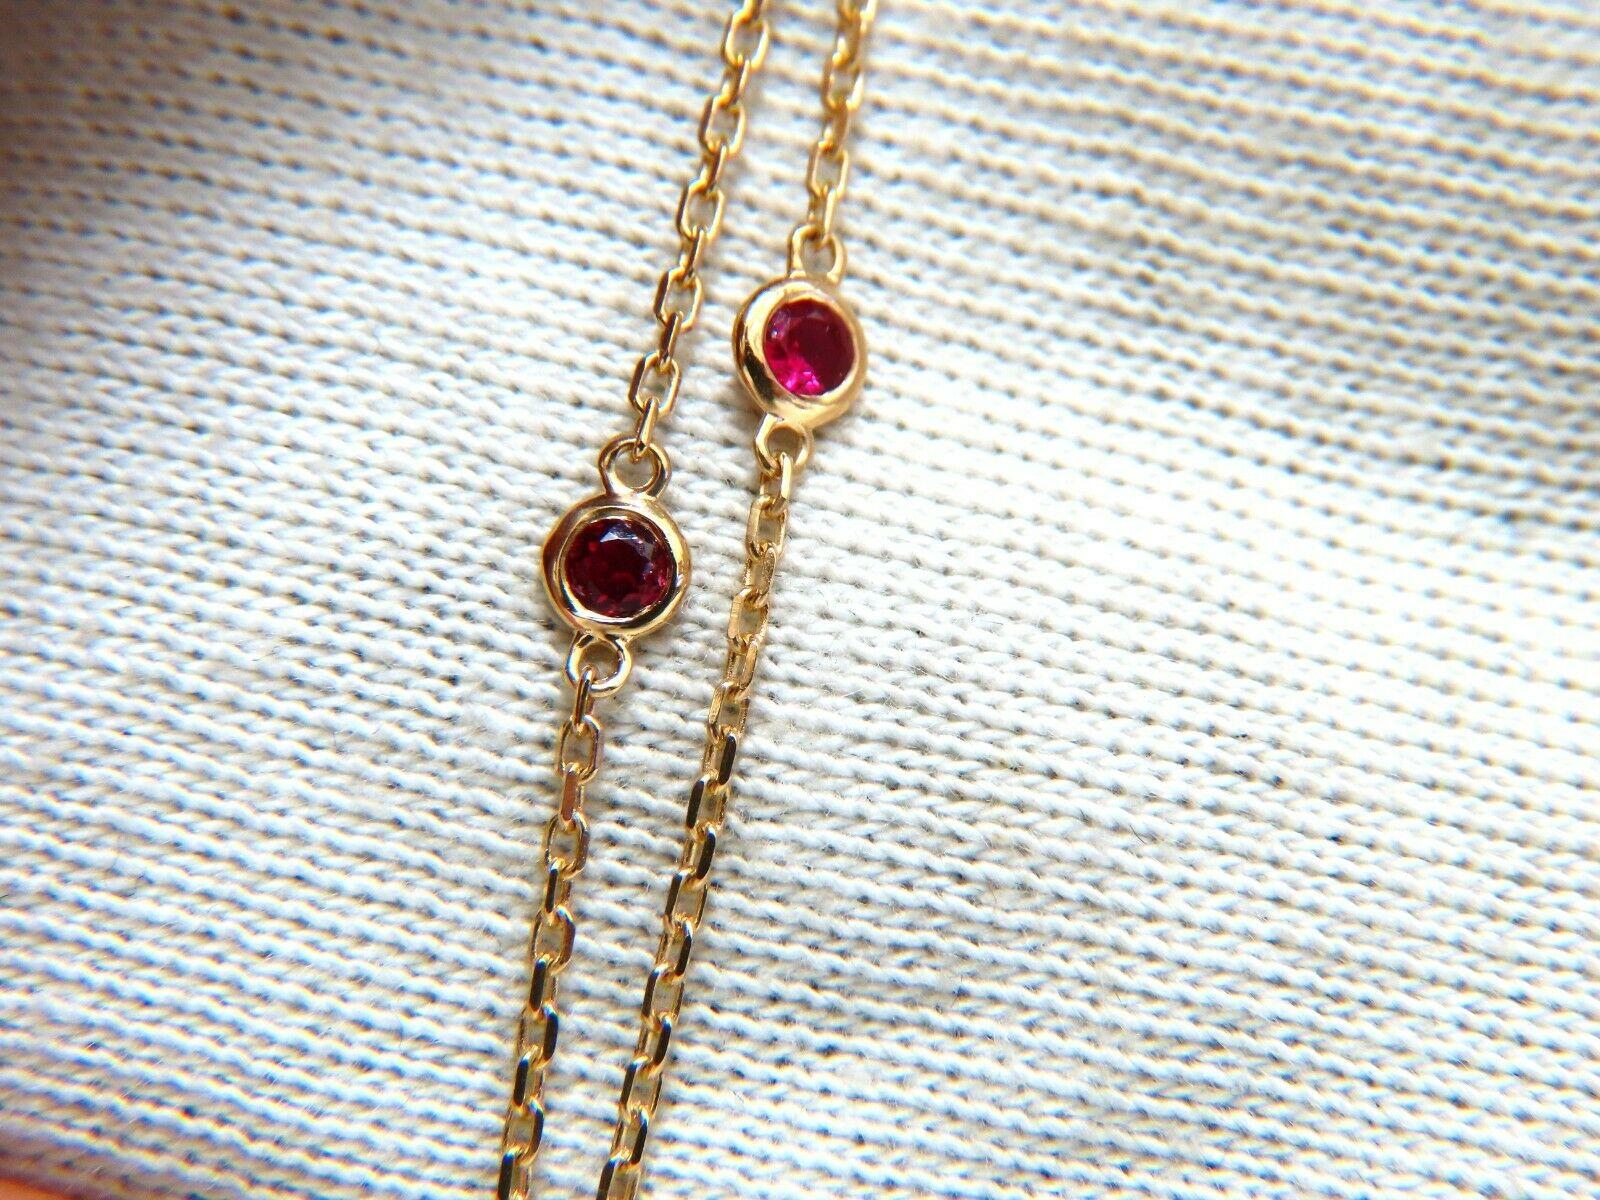 .34CT Natural Fancy Brown Heart cut diamond necklace.

Vs-2 Clean Clarity, Fully transparent.

Full cut, amazing sparkles

.22ct round diamonds on chain.

Fancy yellow Si-2 clarity.

.30ct natural round rubies on chain.

14Kt Yellow Gold 

18 inches